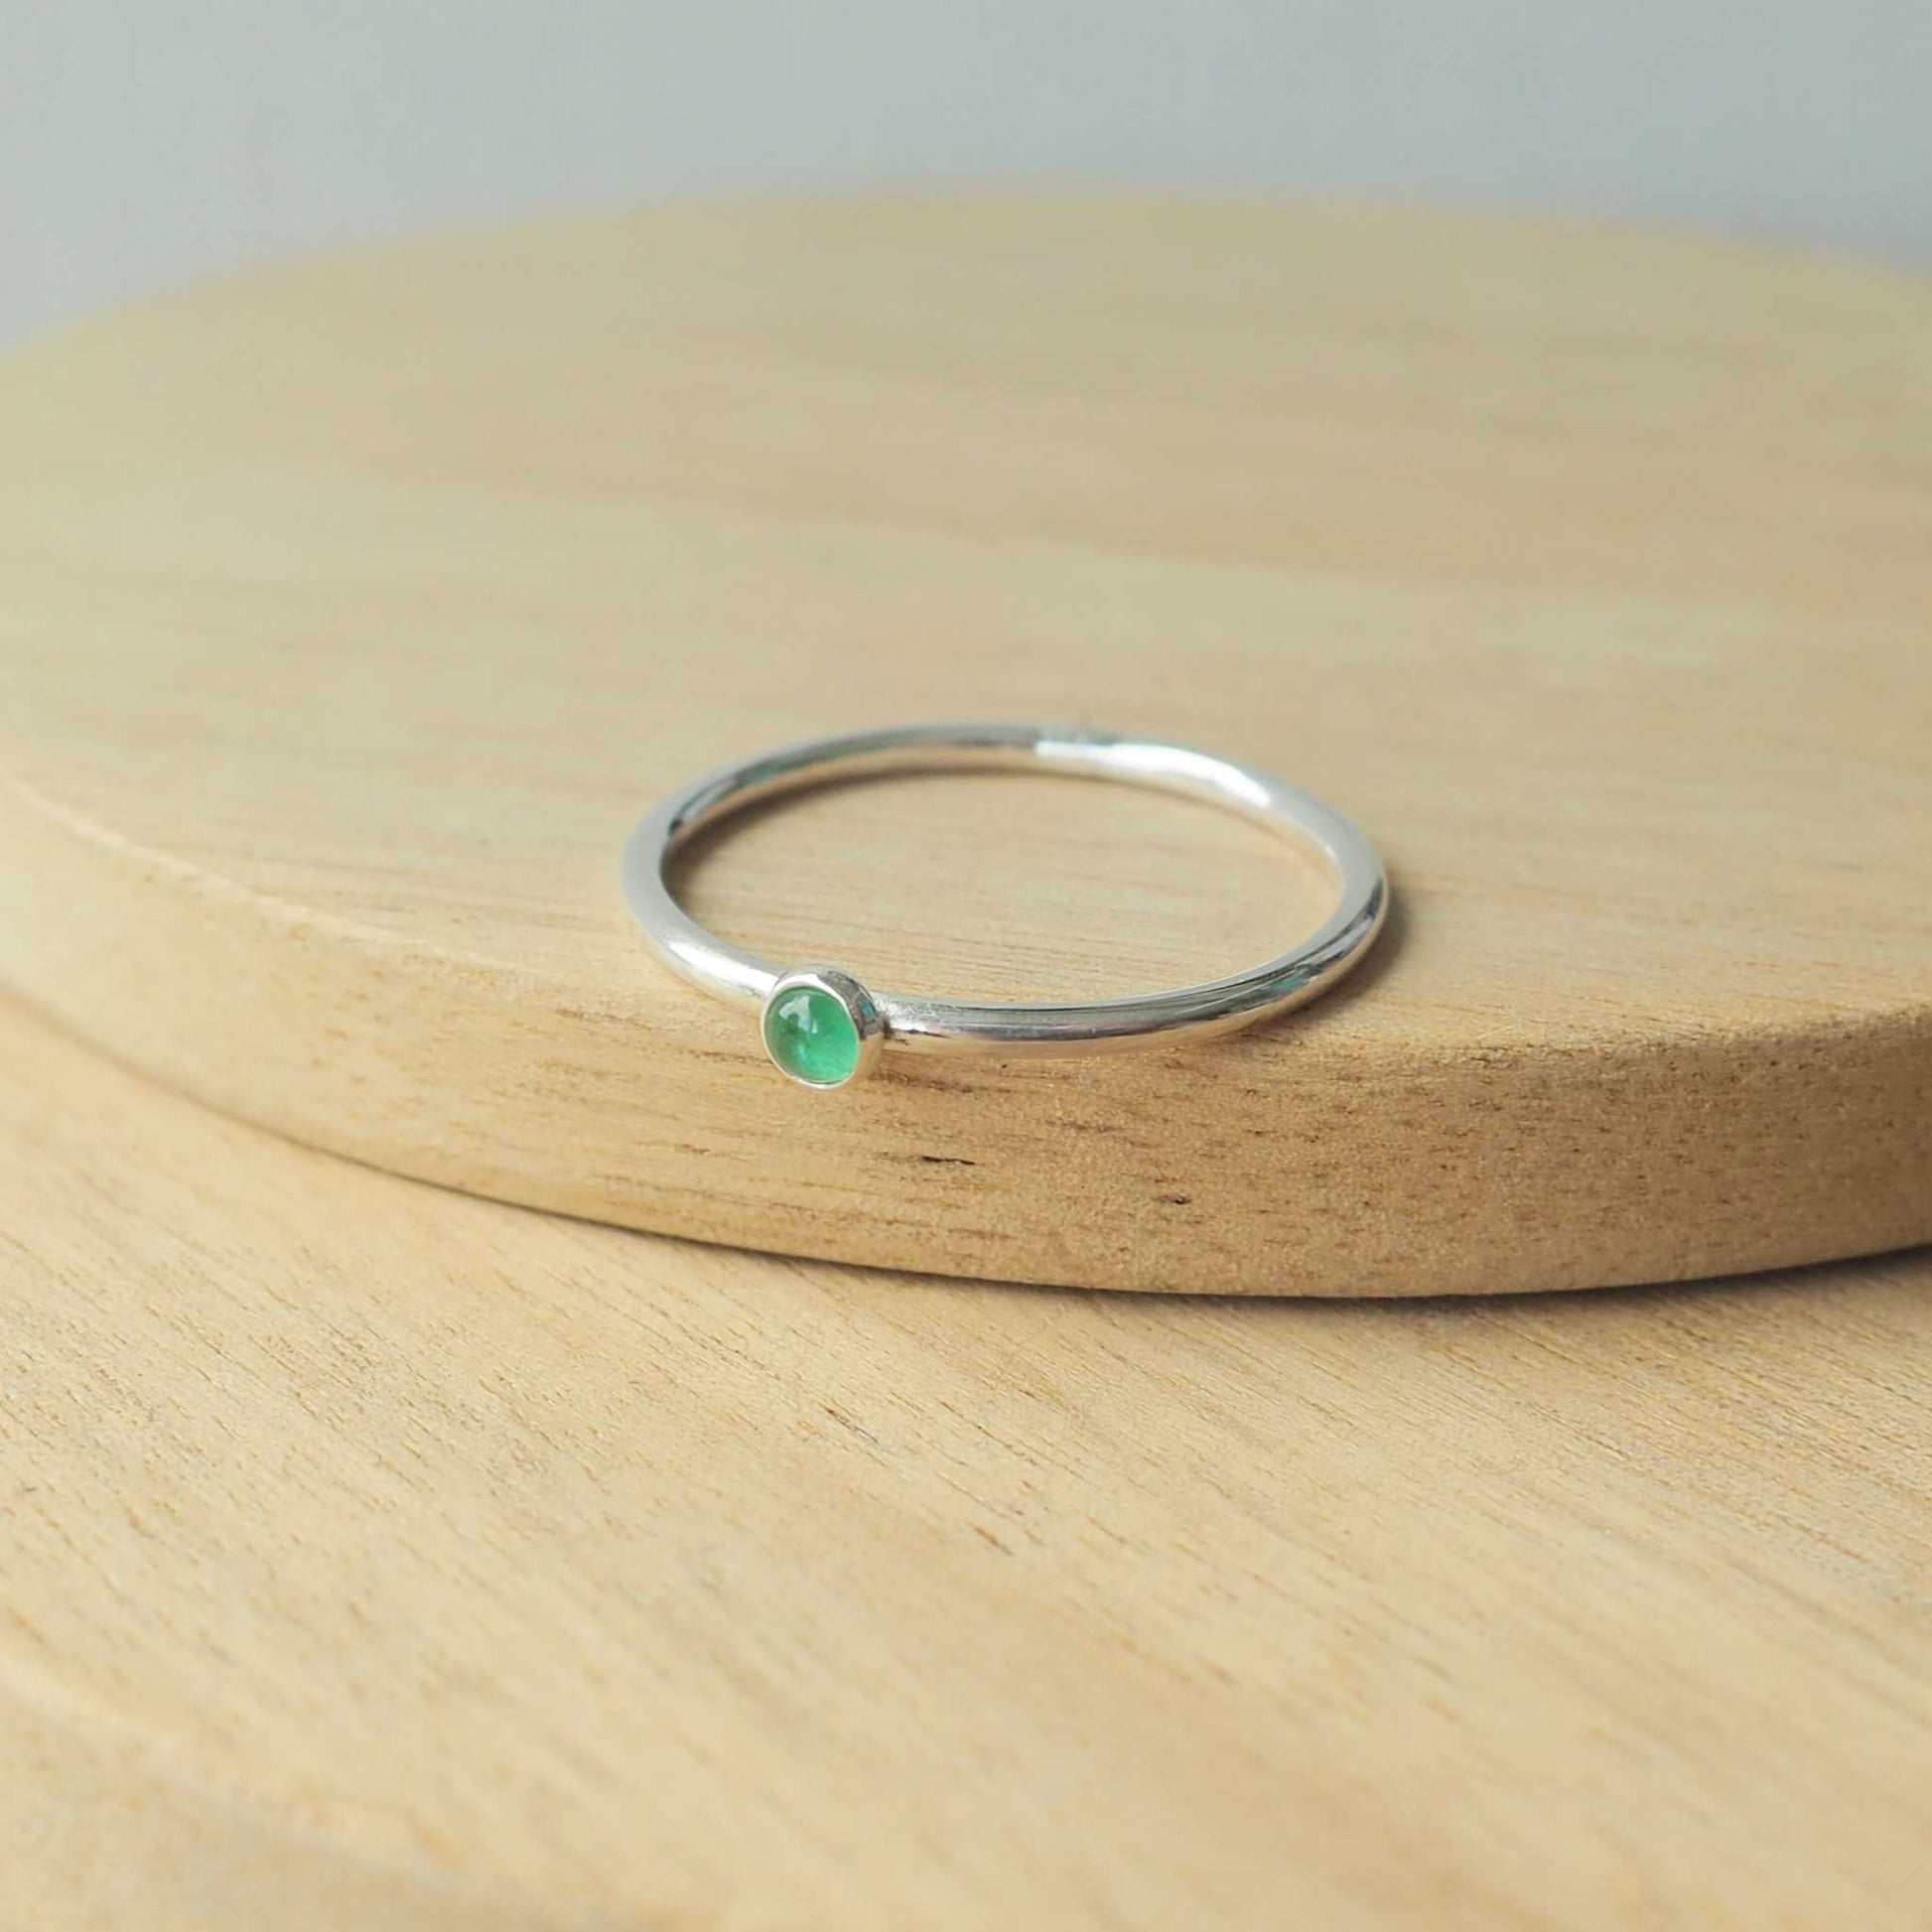 Emerald and Sterling Silver Gemstone ring with a round 3mm cabochon in Emerald, Birthstone for May. Handmade in Scotland by maram jewellery